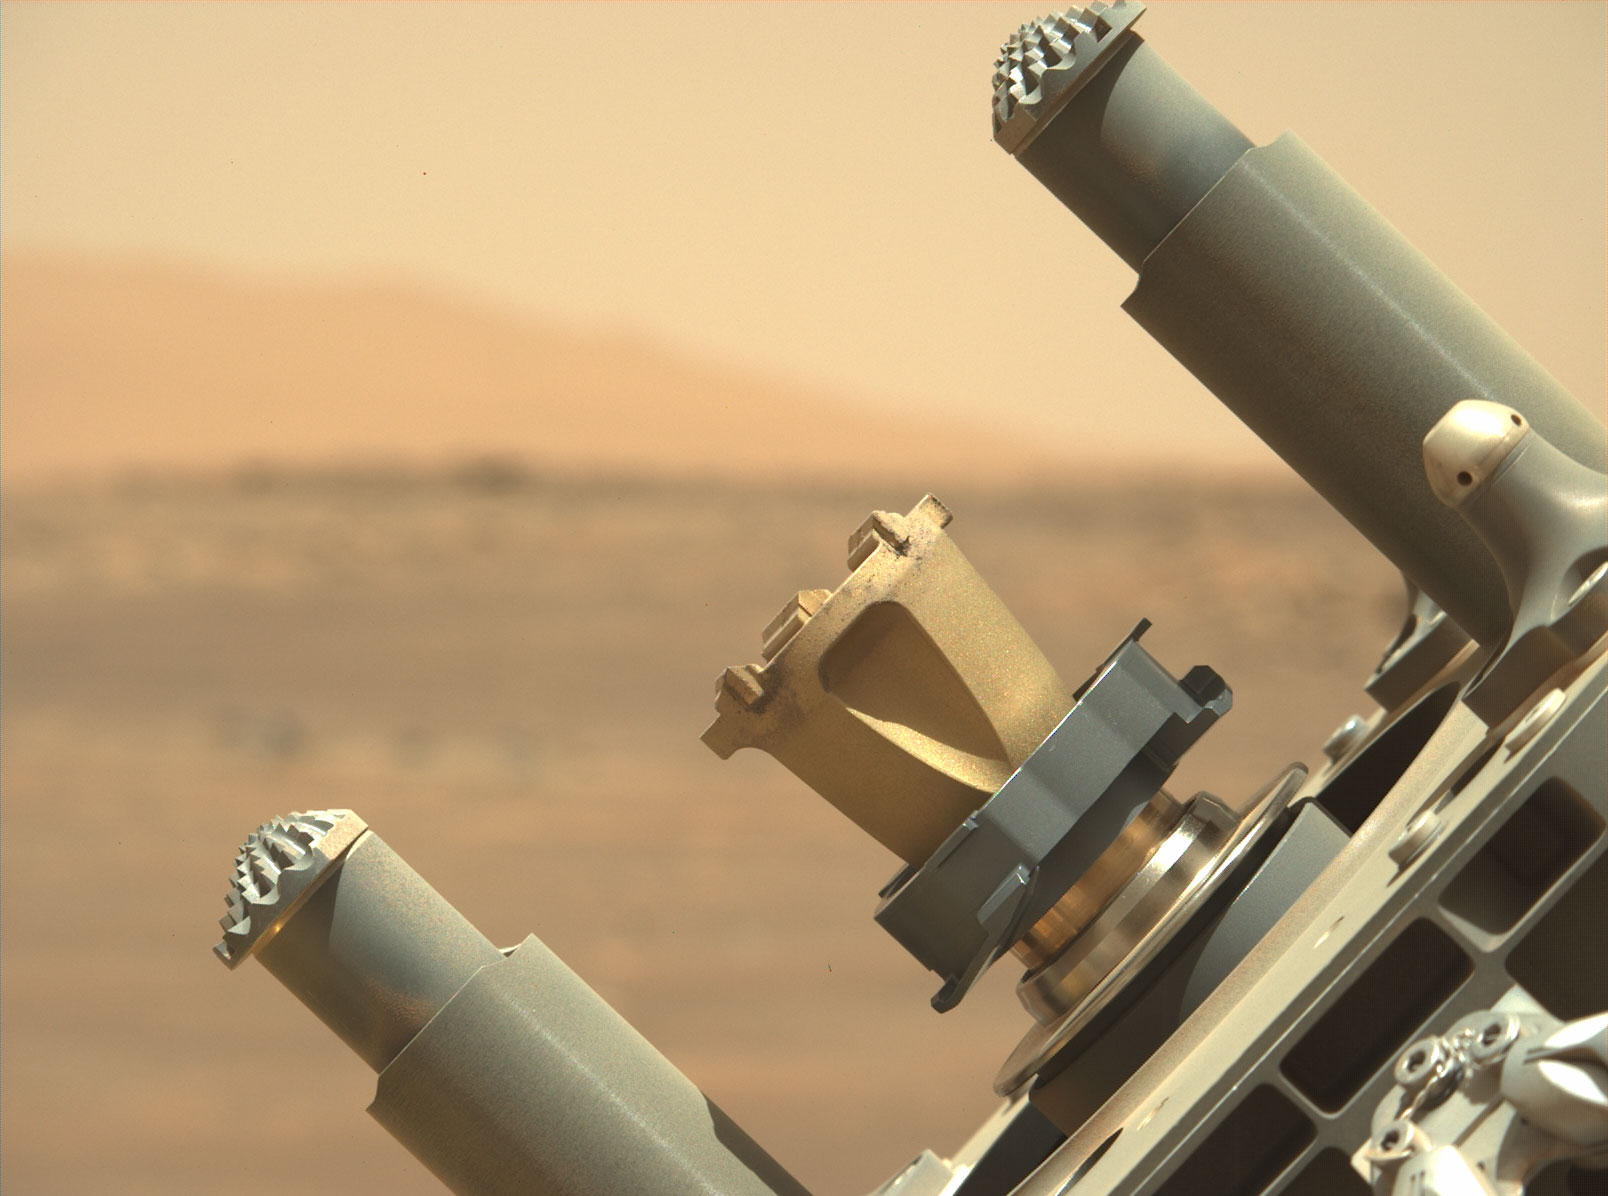 Close-up photo shows detailed side view of Perseverance rover's abrading bit, a broad conical shape with a 5-centimeter diameter flat surface for grinding rocks.